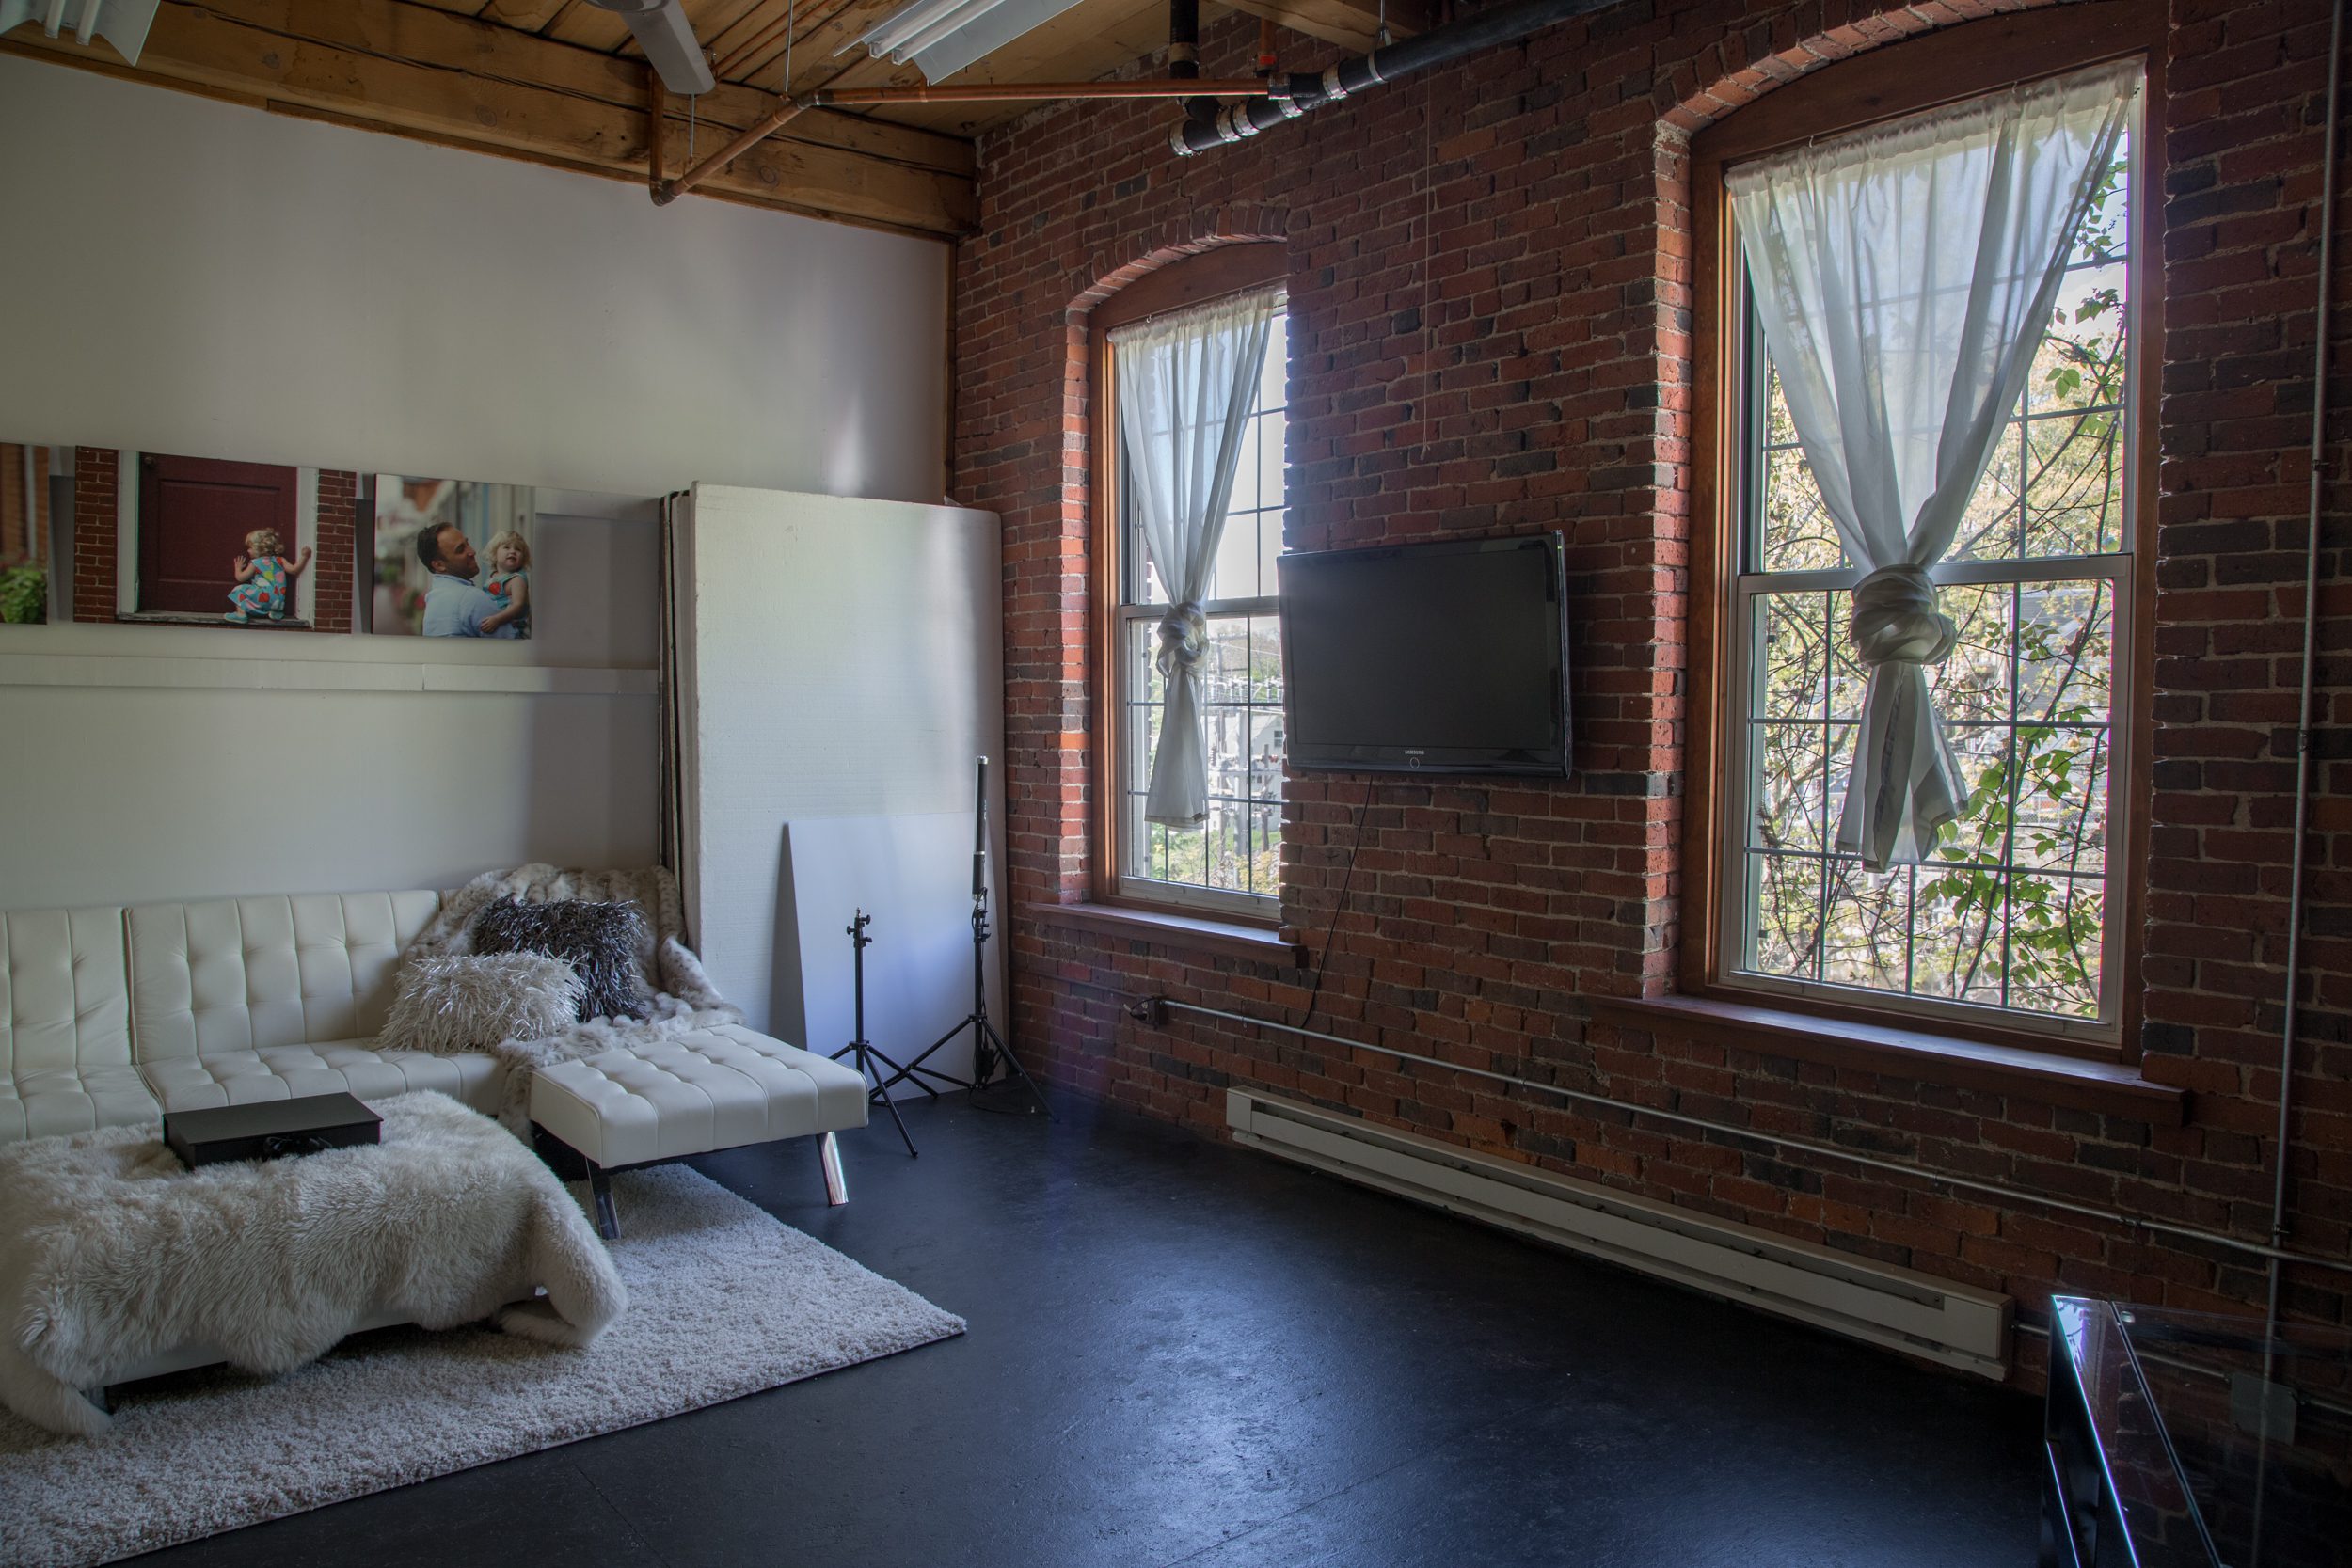 Interiors of photography studio in old mill